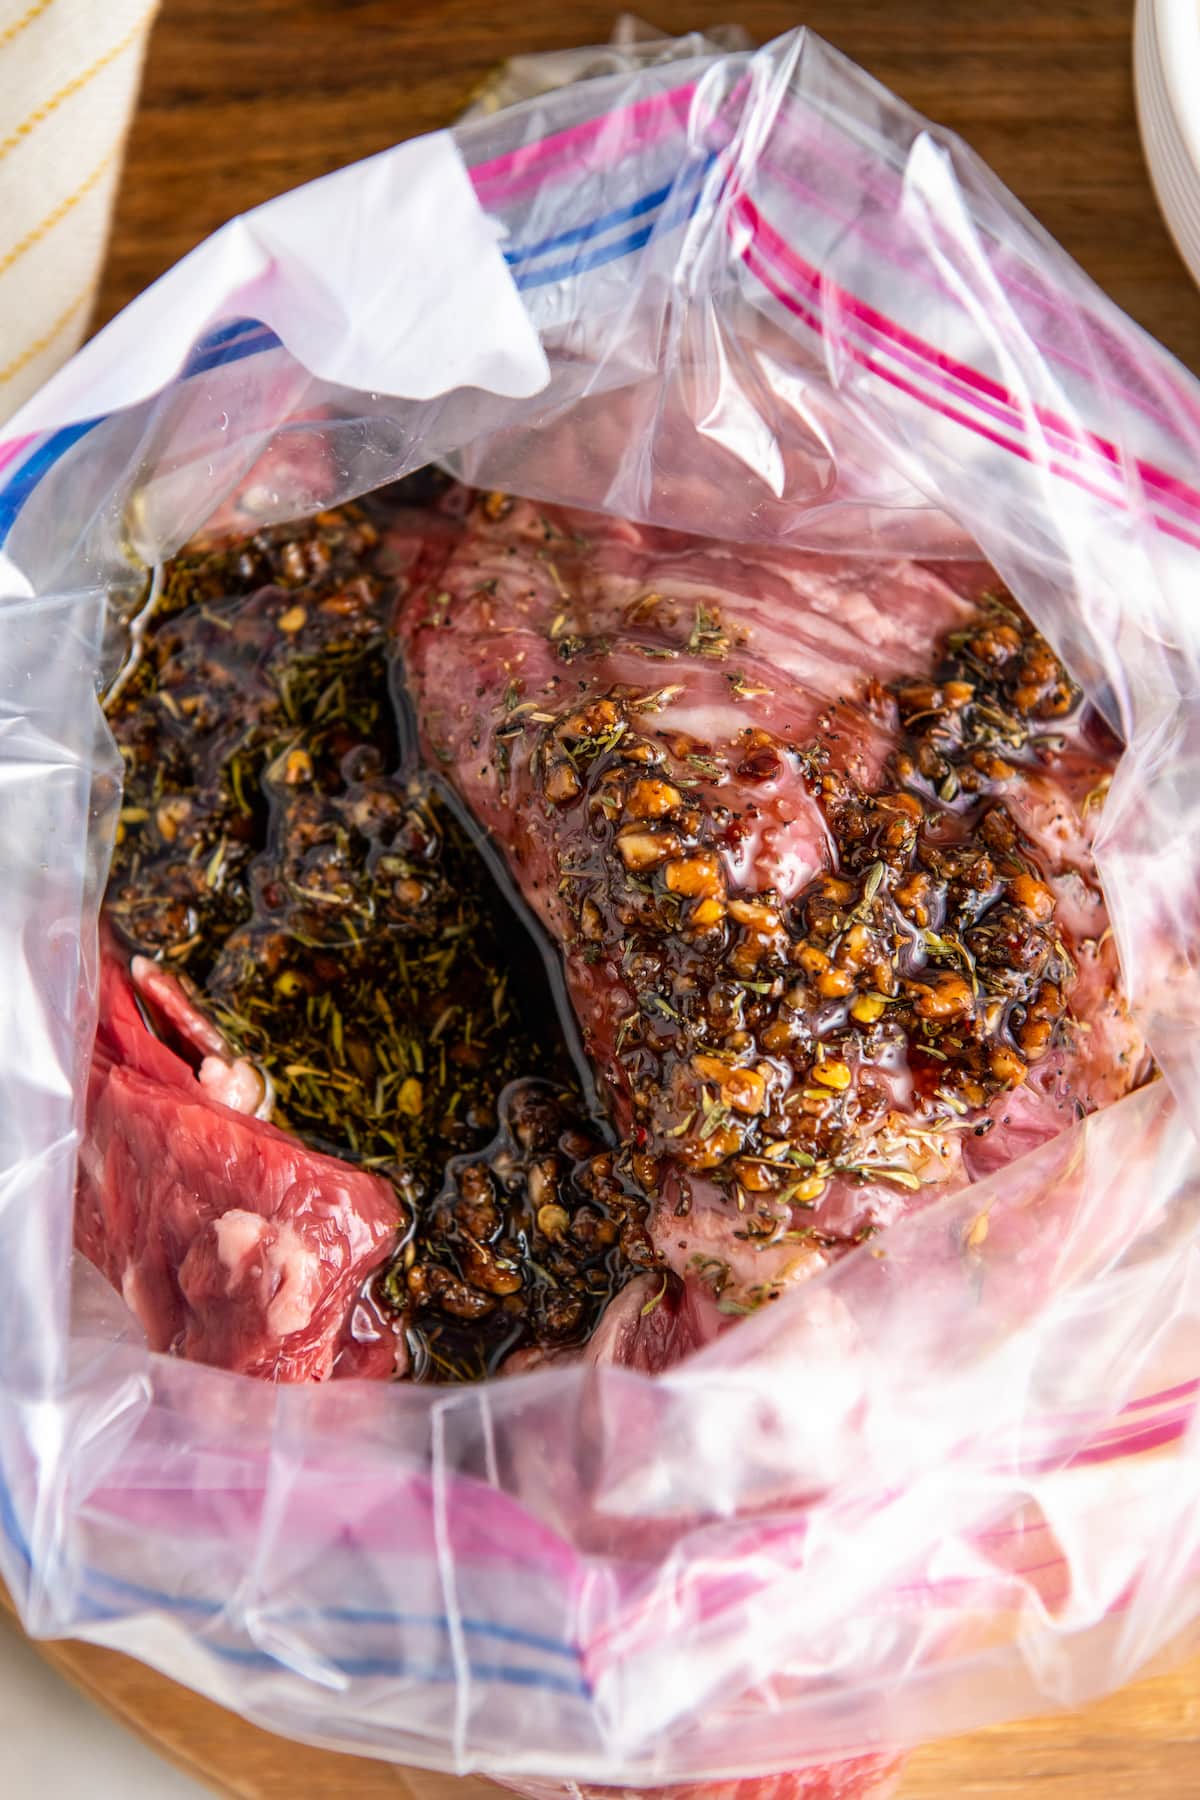 Overhead view looking into an open ziplock bag with skirt steak and marinade